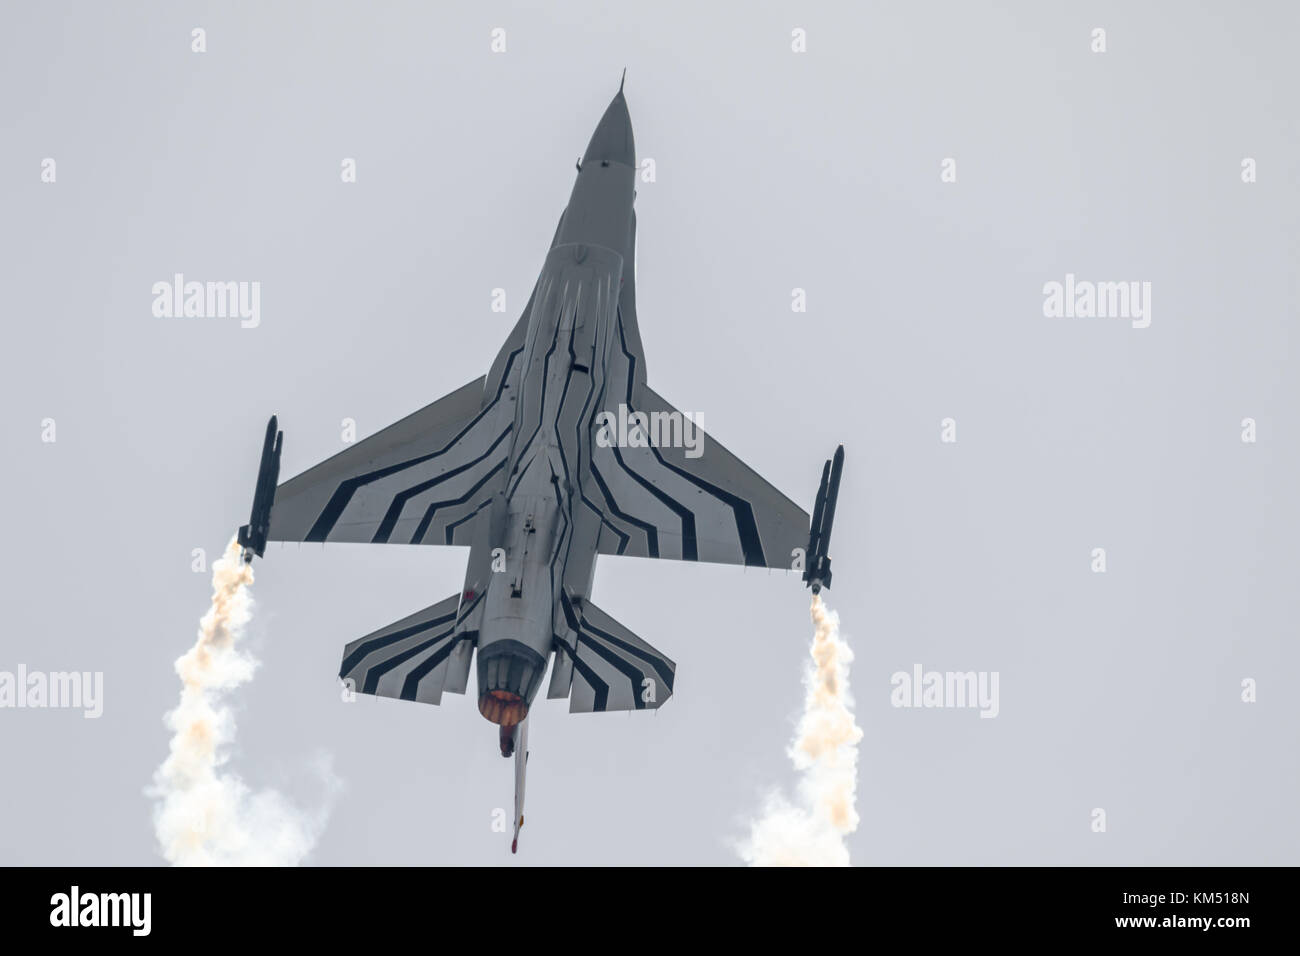 TORRE DEL MAR, MALAGA, SPAIN-JUL 30: Aircraft F-16 Belgian solo display taking part in a exhibition on the 2nd airshow of Torre del Mar on July 30, 20 Stock Photo